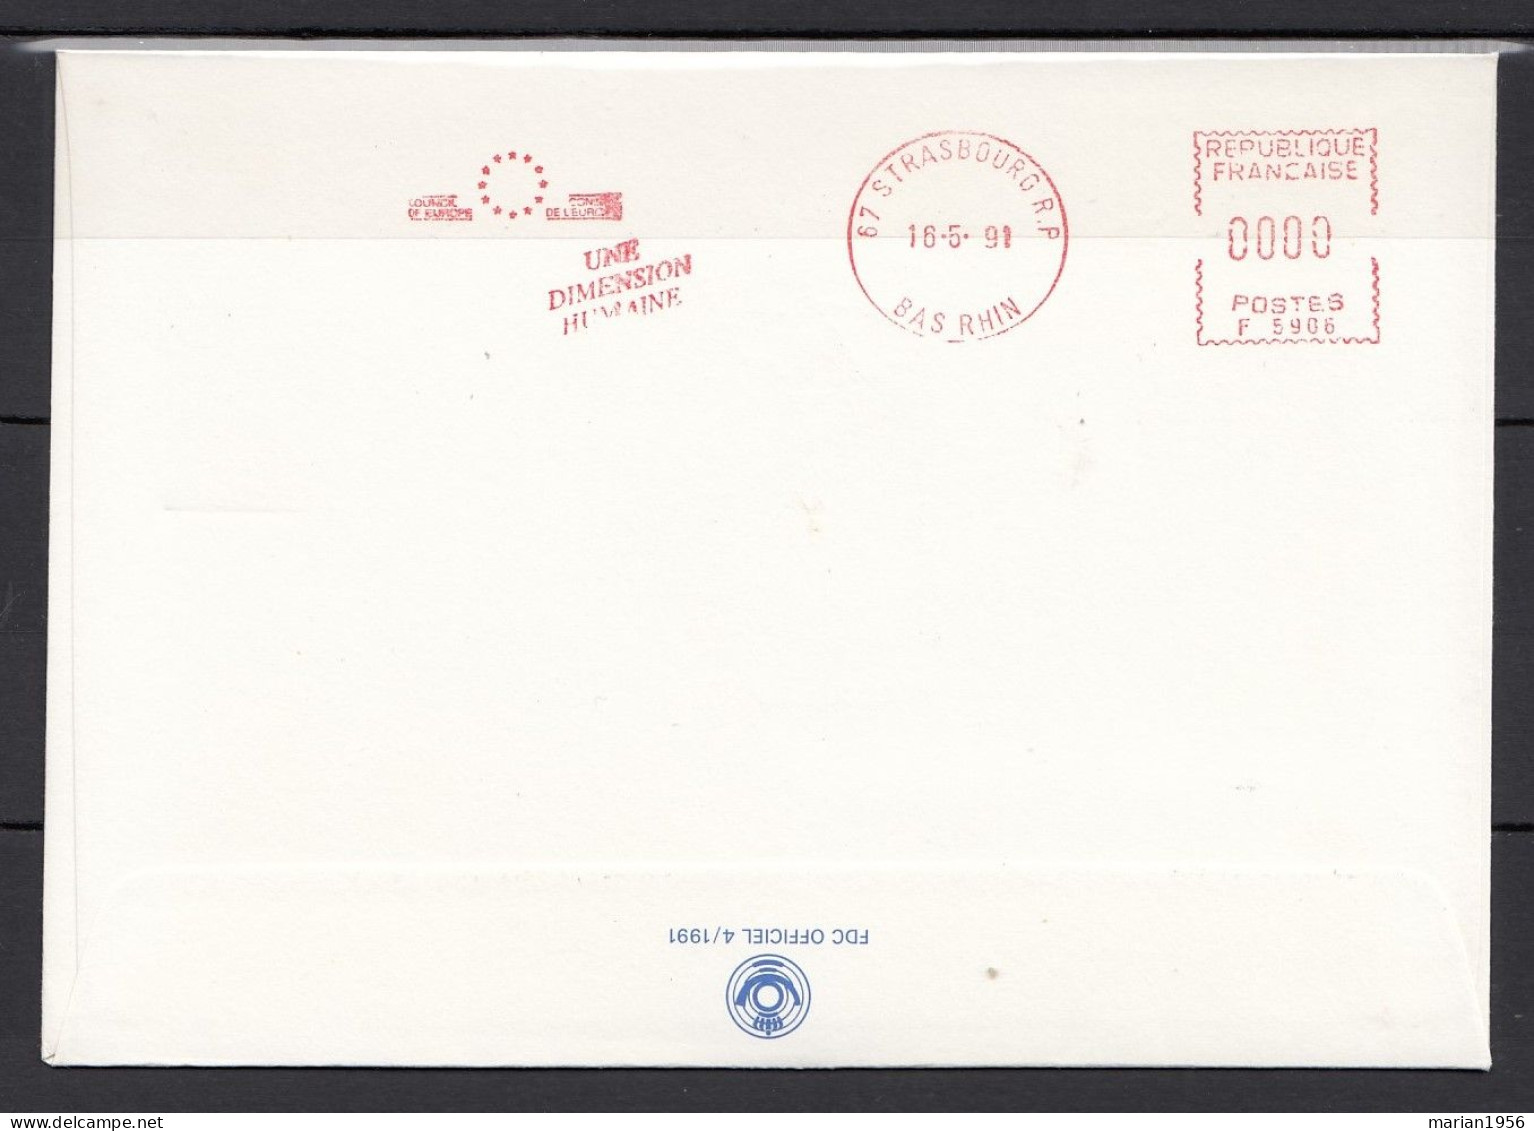 Luxembourg 1991 - FDC Special - EUROPA CEPT - Europe Spatiale - Tirage Limite A 60 Ex.numerotes - 1991